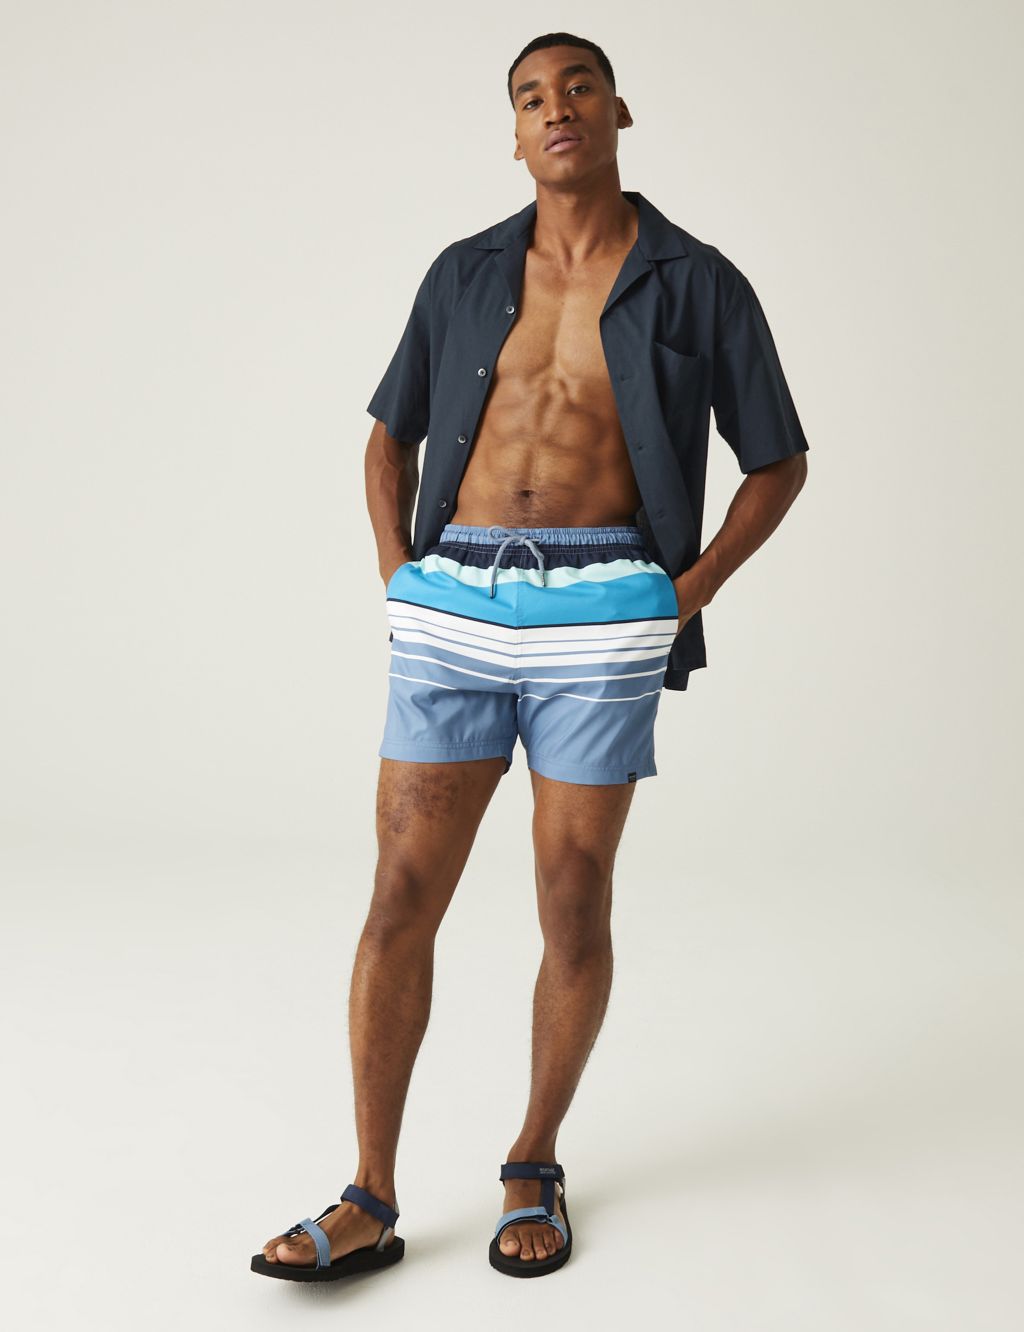 Loras Quick Dry Pocketed Striped Swim Shorts